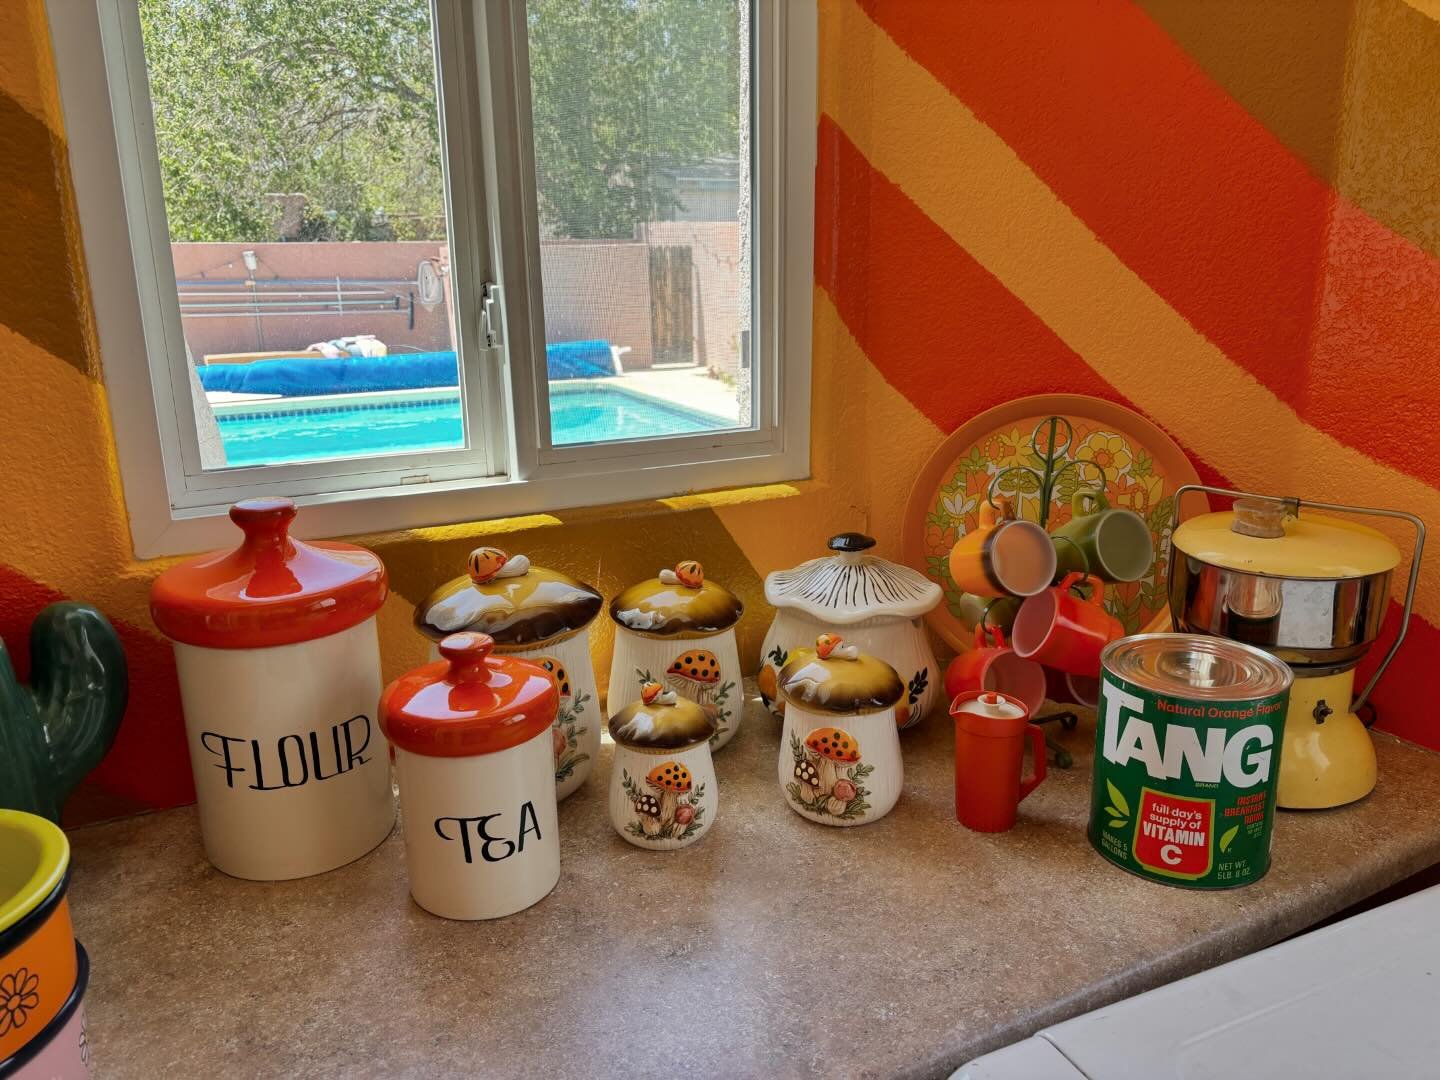 After another great @psvintagemarket this past weekend, I rewarded myself with a few things, including these very cool vintage flour and tea canisters from @zimboretro. It&rsquo;s no secret I love vintage home decor and it&rsquo;s even more fun when 